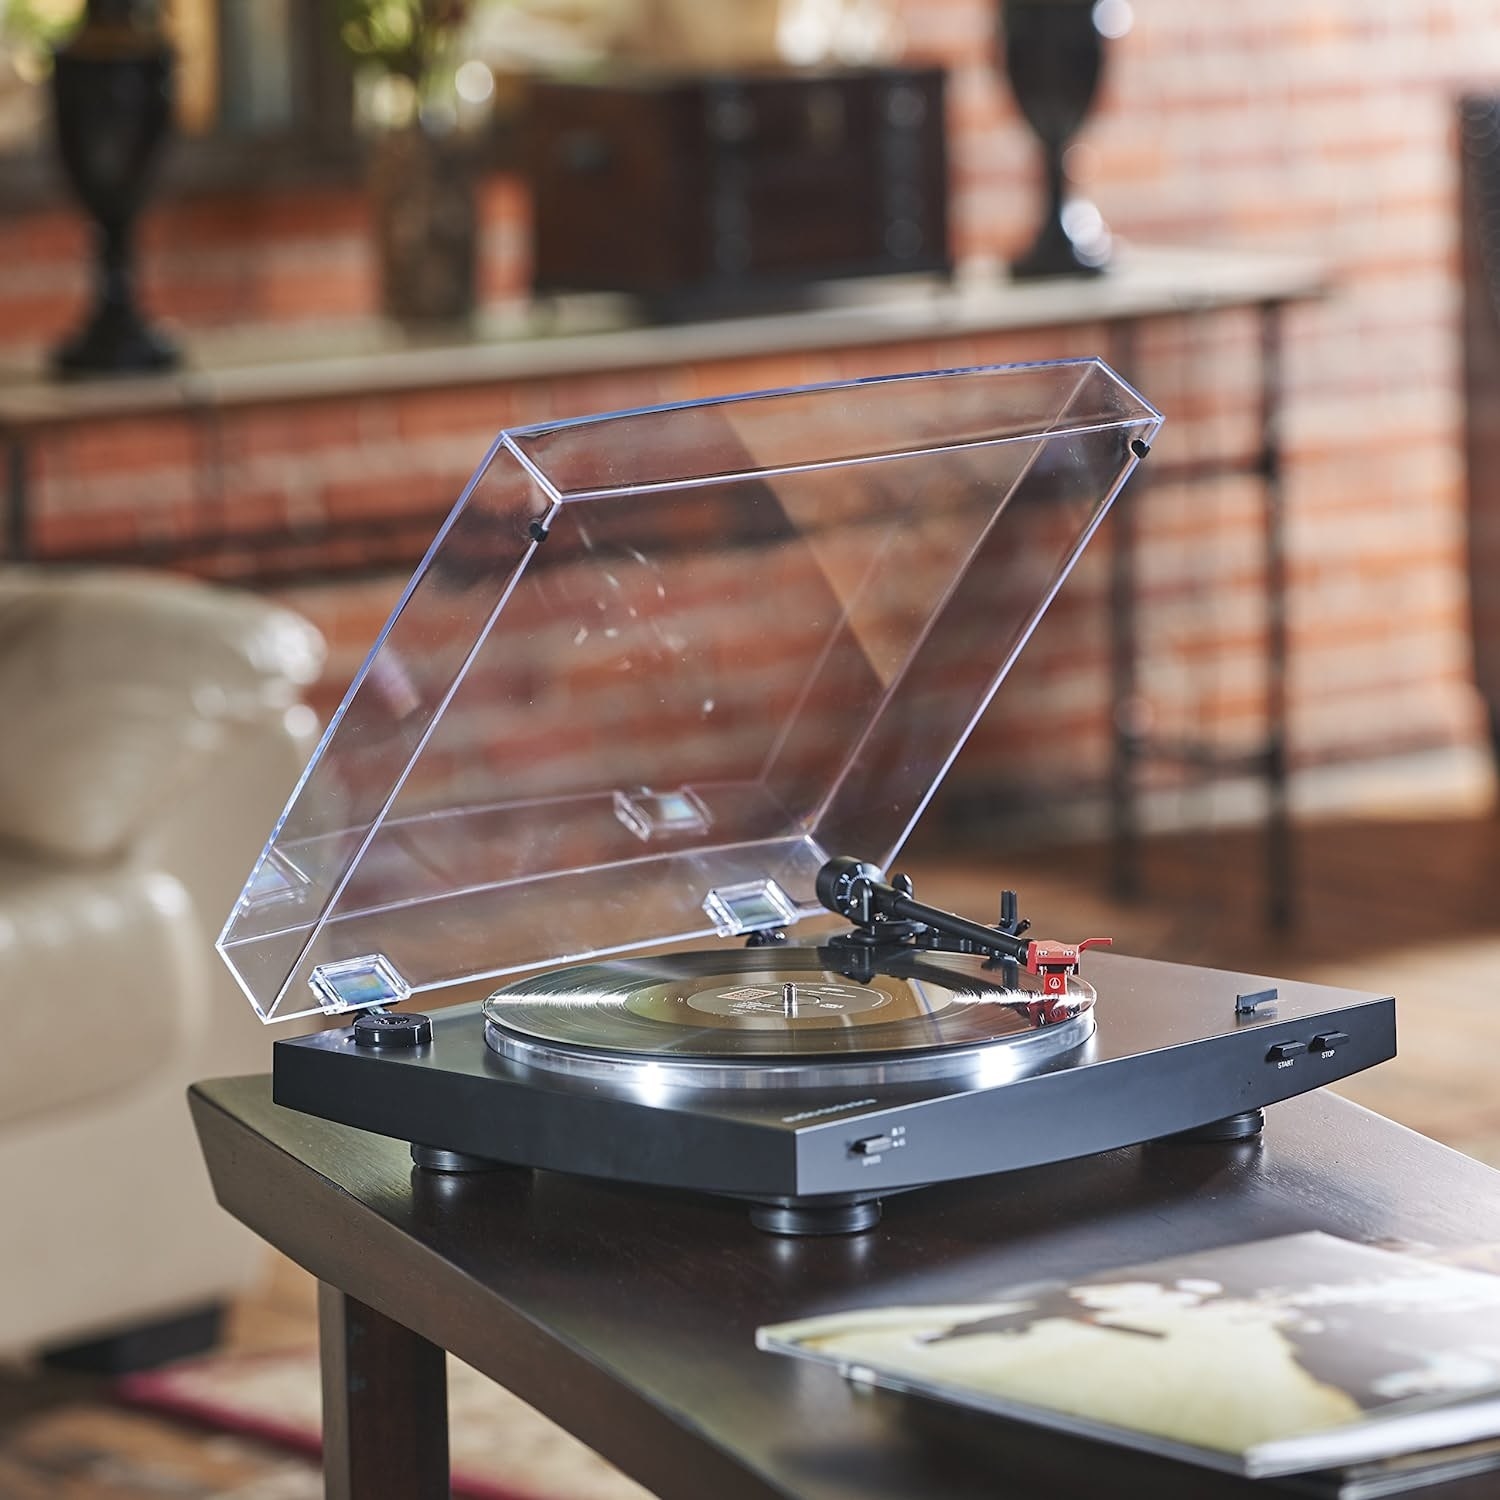 THe record player with black base and clear lid